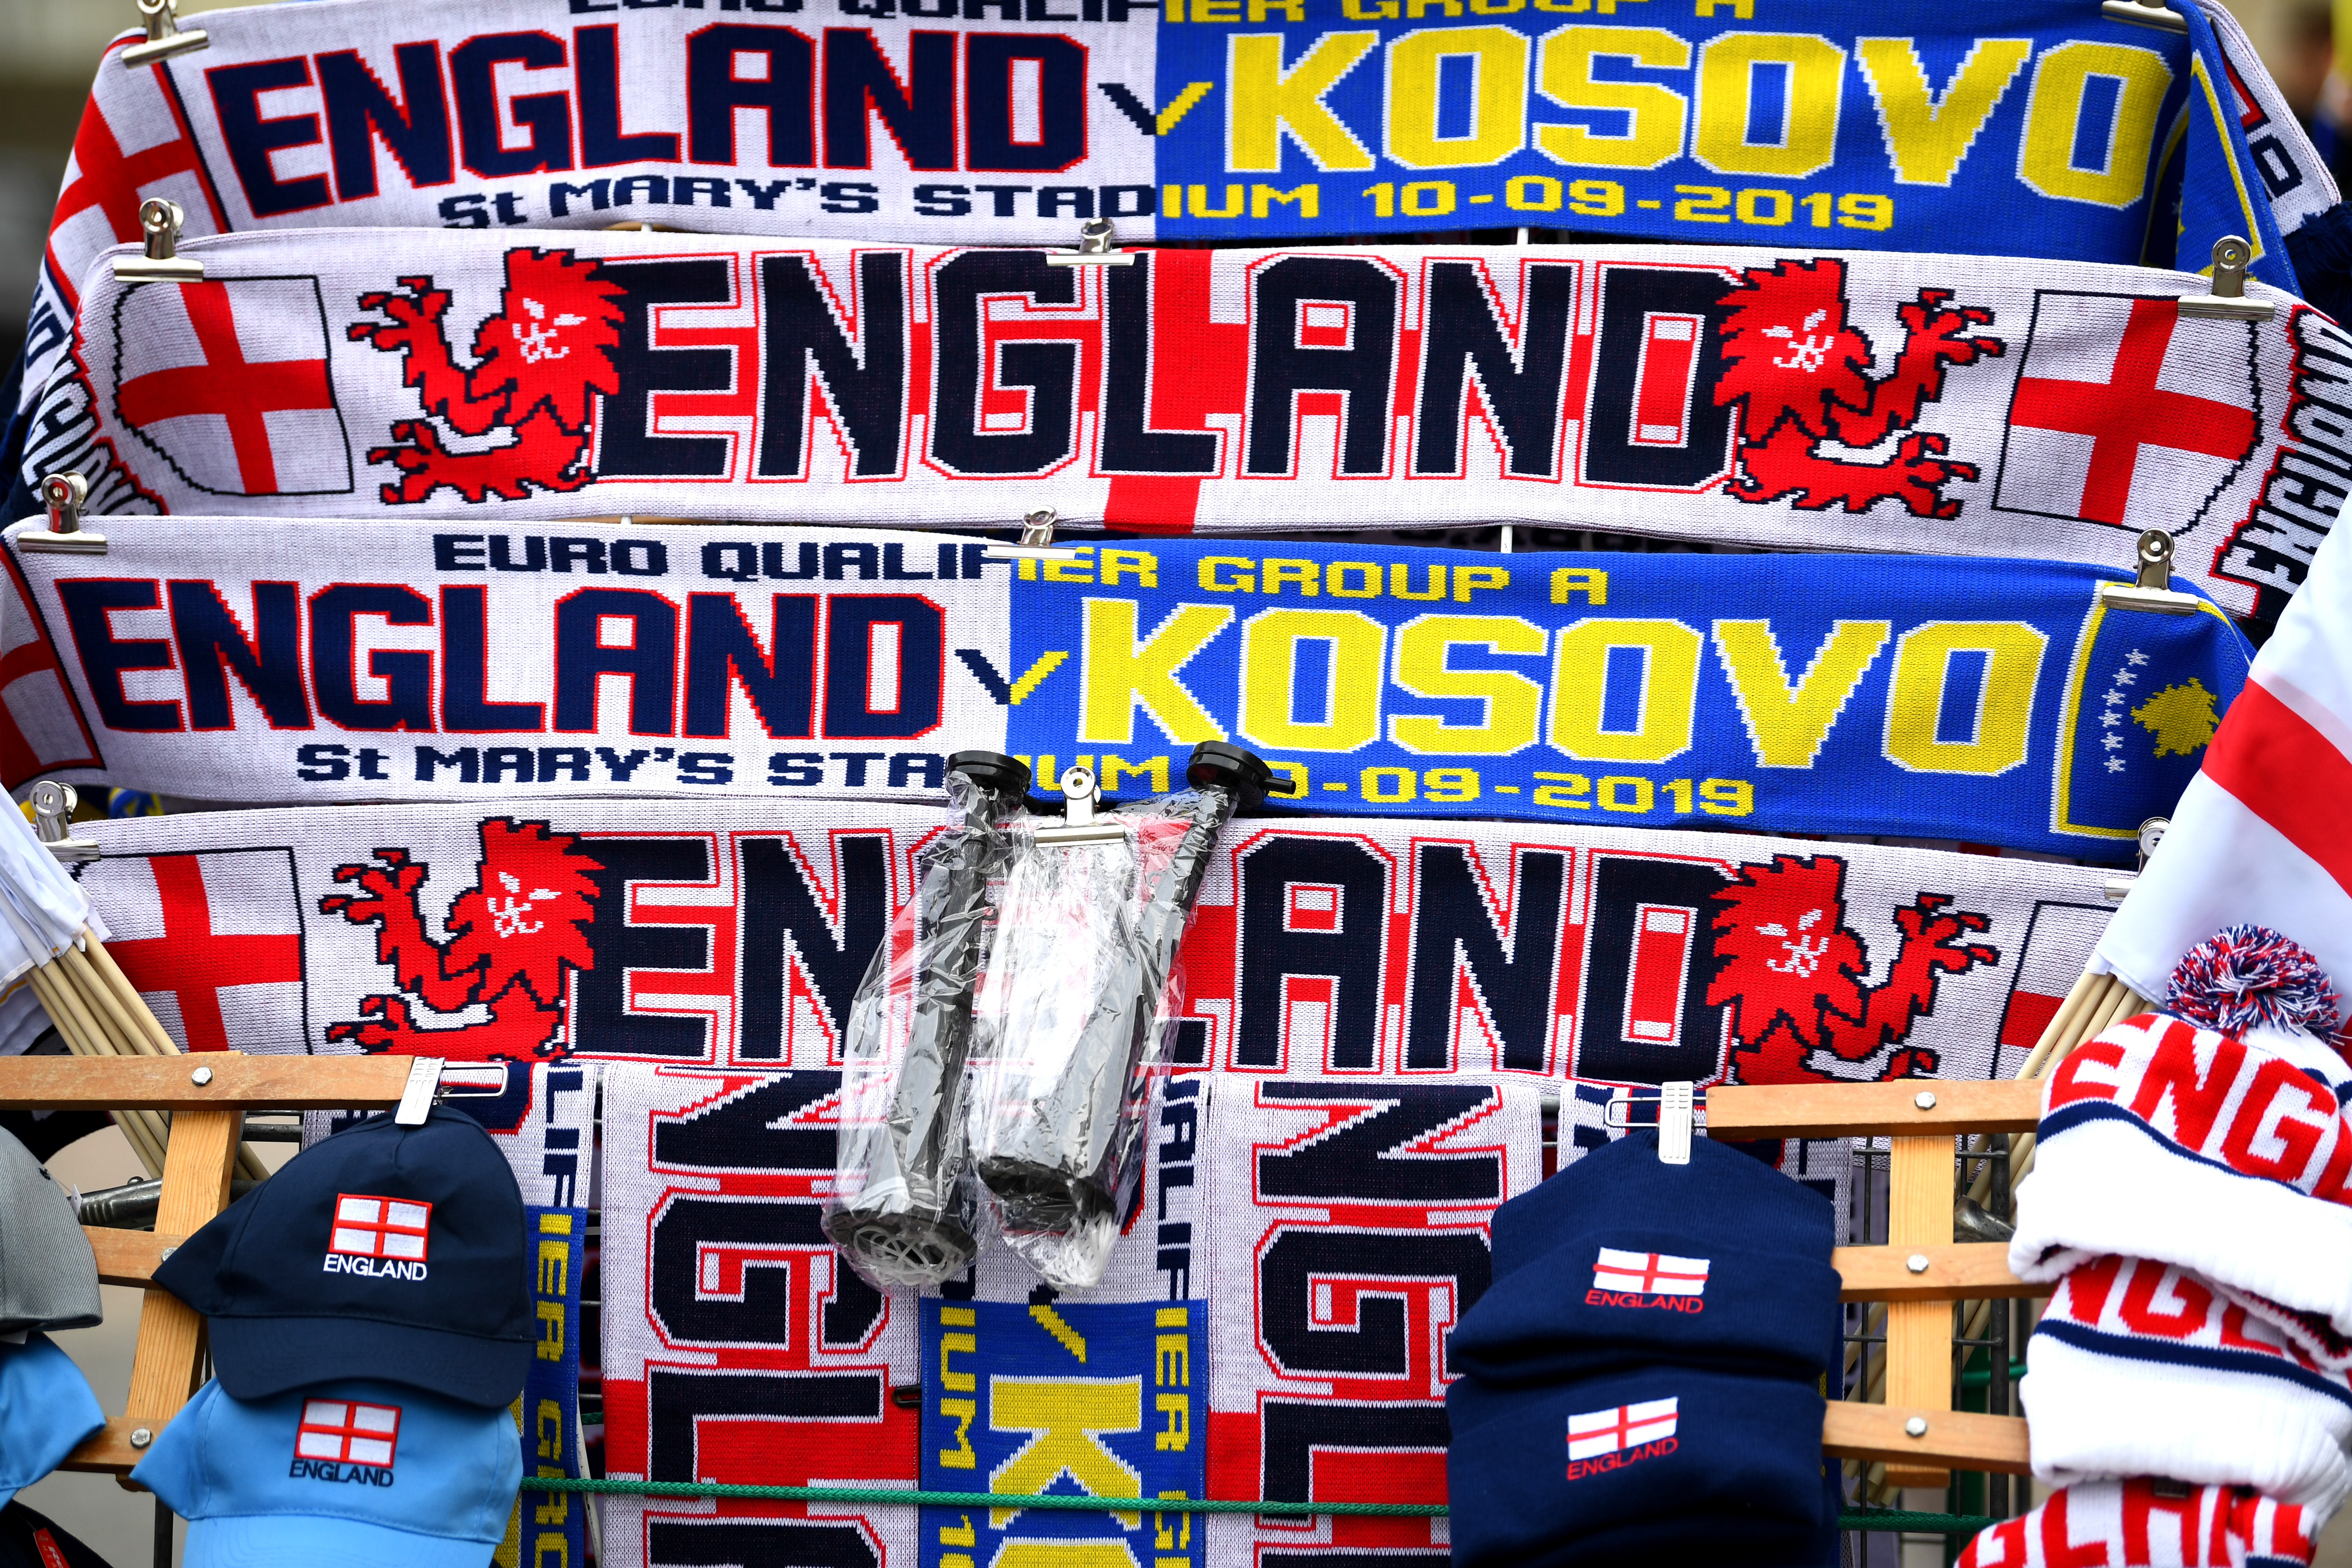 SOUTHAMPTON, ENGLAND - SEPTEMBER 10: A detailed view of a half-and-half scarf outside the ground ahead of the UEFA Euro 2020 qualifier match between England and Kosovo at St. Mary's Stadium on September 10, 2019 in Southampton, England. (Photo by Clive Mason/Getty Images)